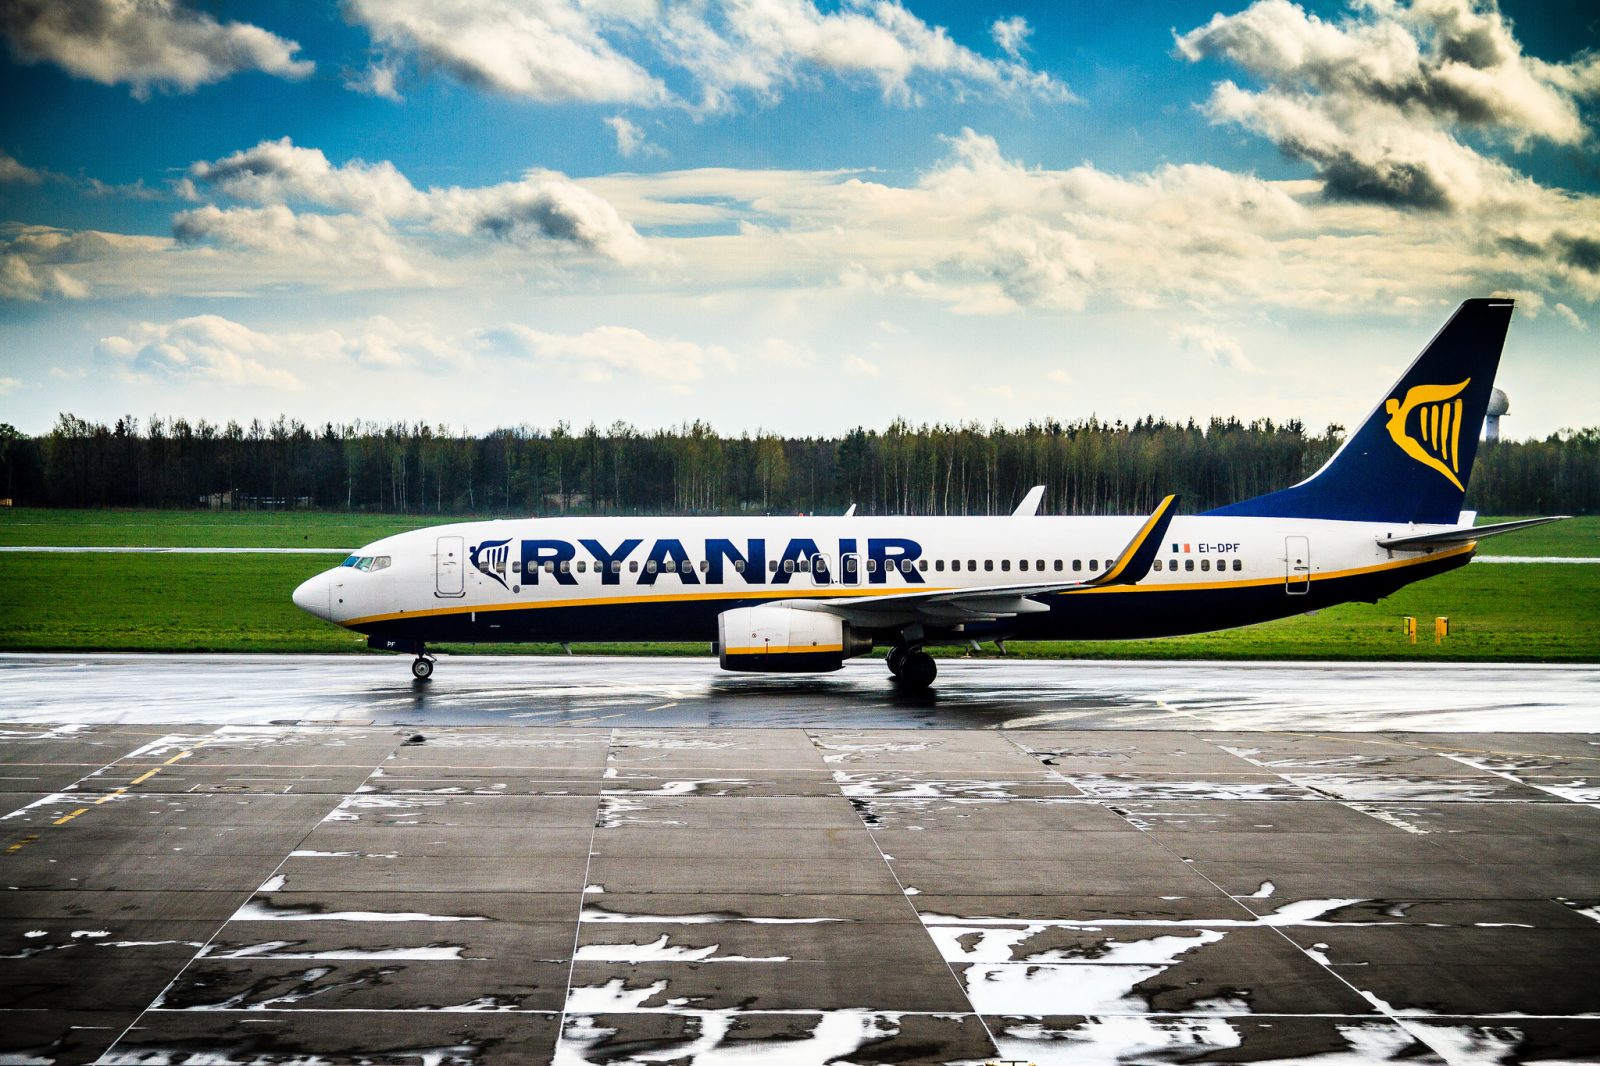 Ryanair Dimisses Cabin Crew Over "Staged" Photo: Sued Over ability to manage labor relations